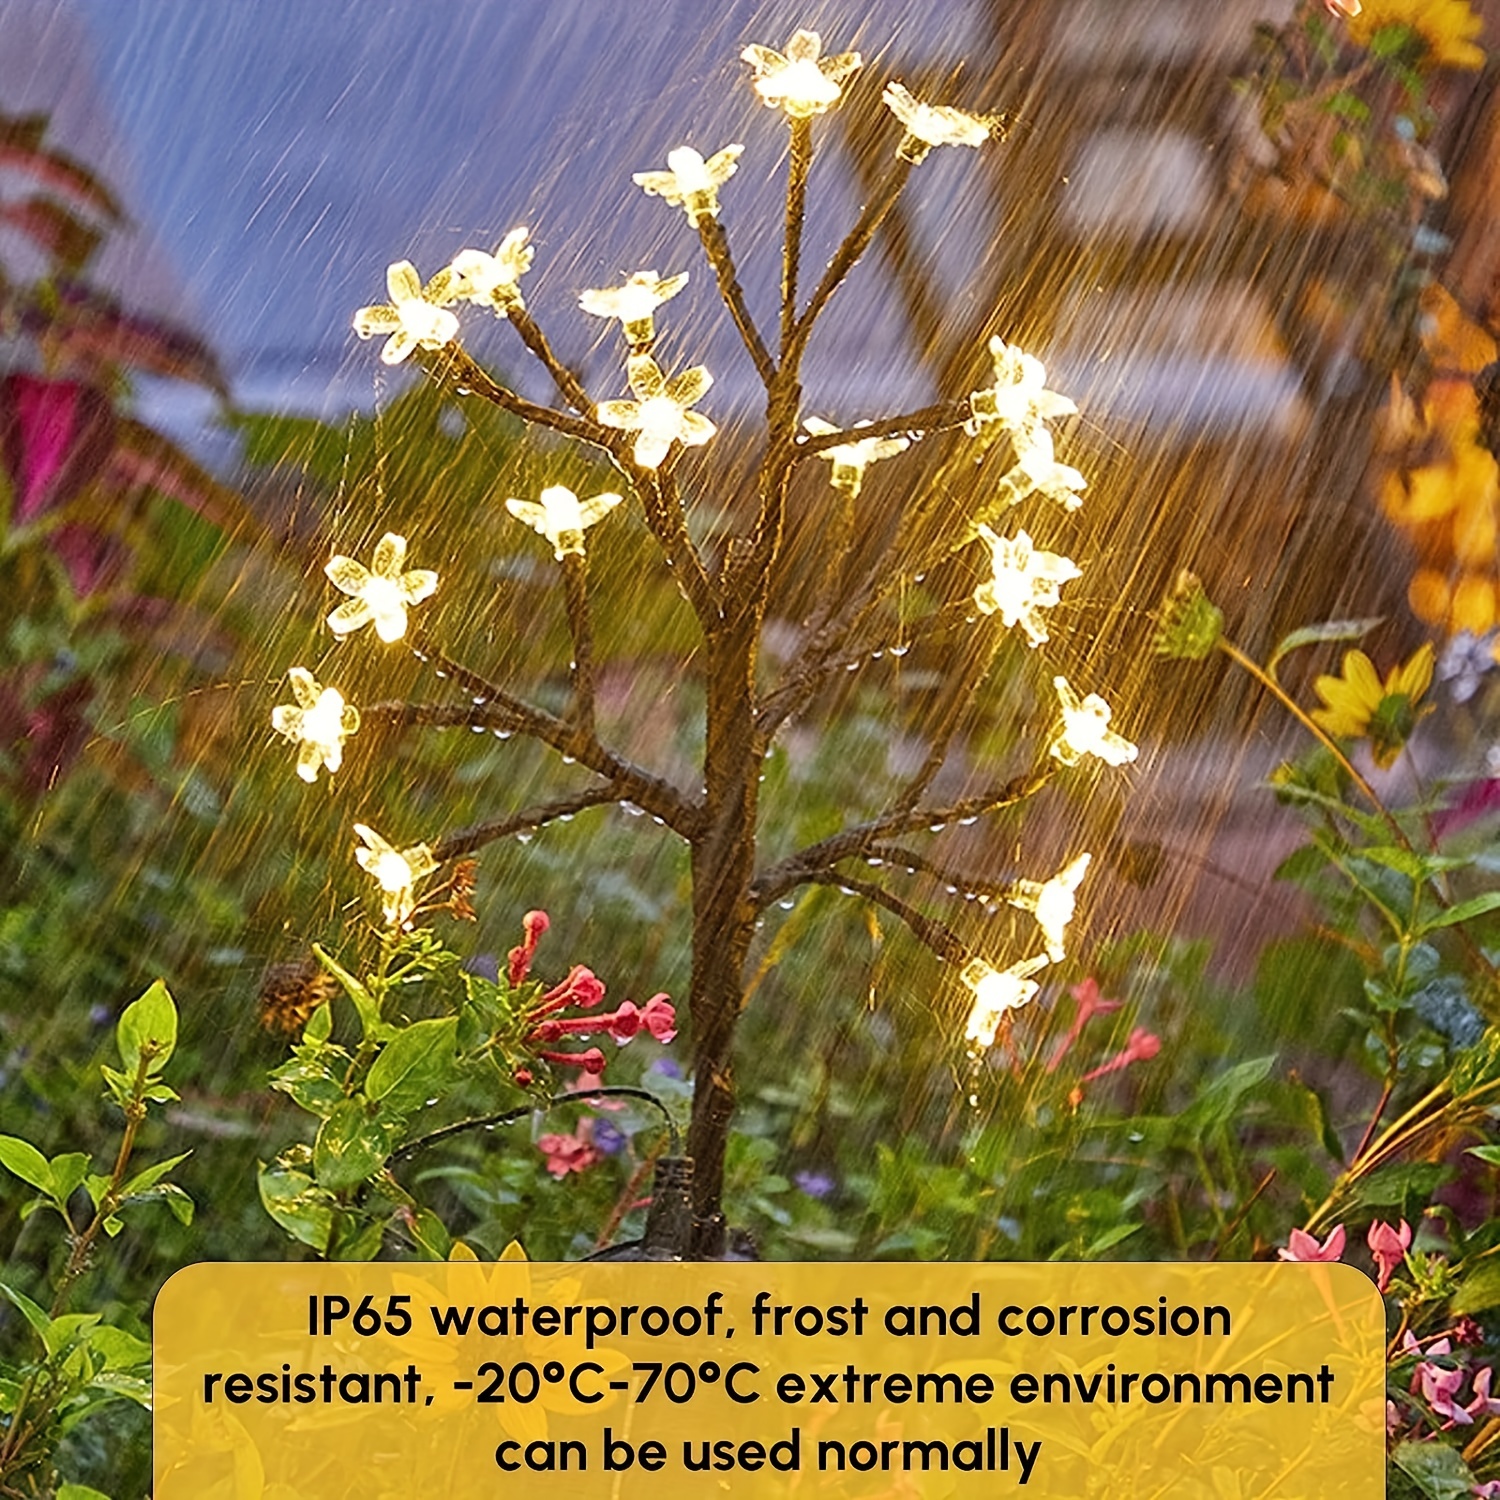 1pc outdoor solar cherry tree lamp artificial flower tree led lamp 20 led waterproof solar garden decorative lamp for lawn garden walkway terrace christmas halloween decorations details 3